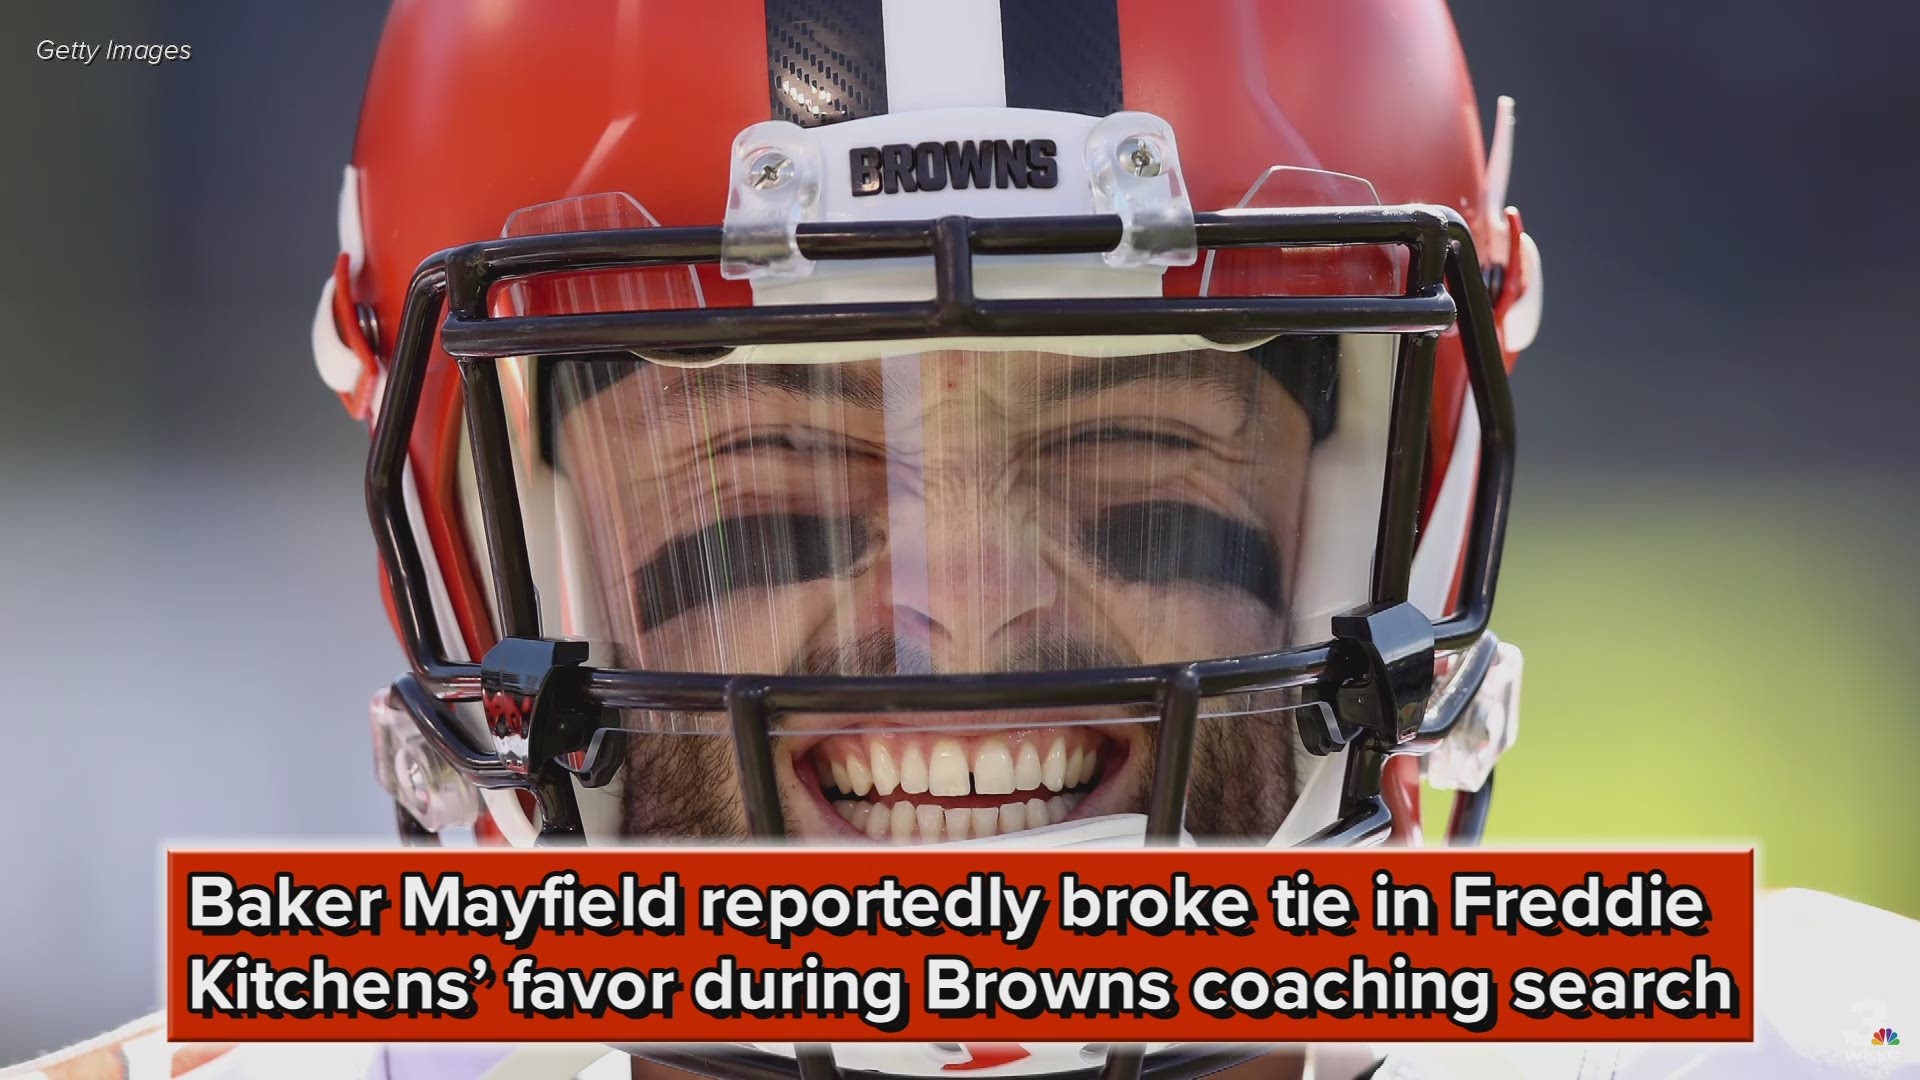 Reportedly, rookie quarterback Baker Mayfield broke the tie in Freddie Kitchens’ favor during the Cleveland Browns’ coaching search.